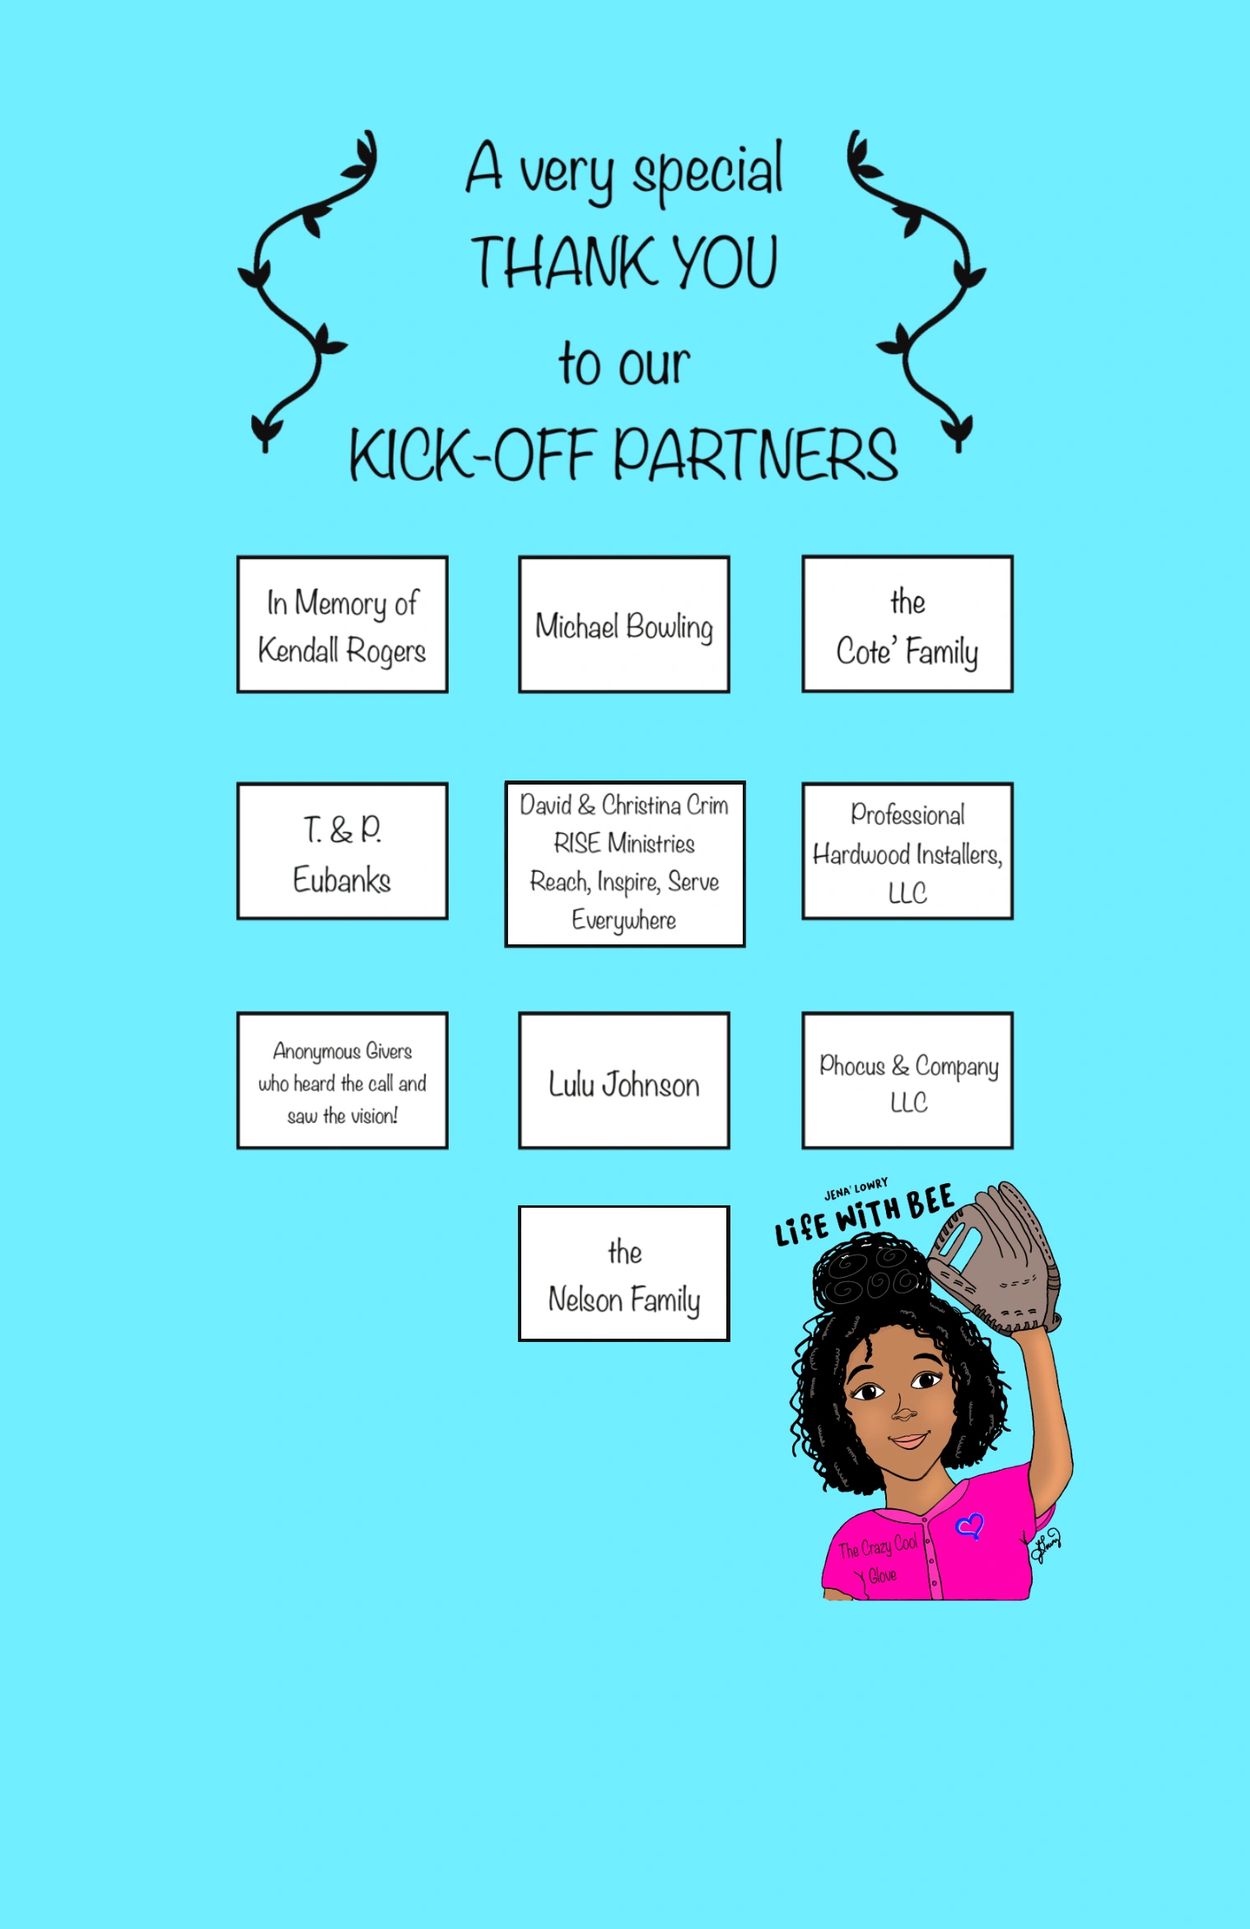 Our Kick-Off Partners